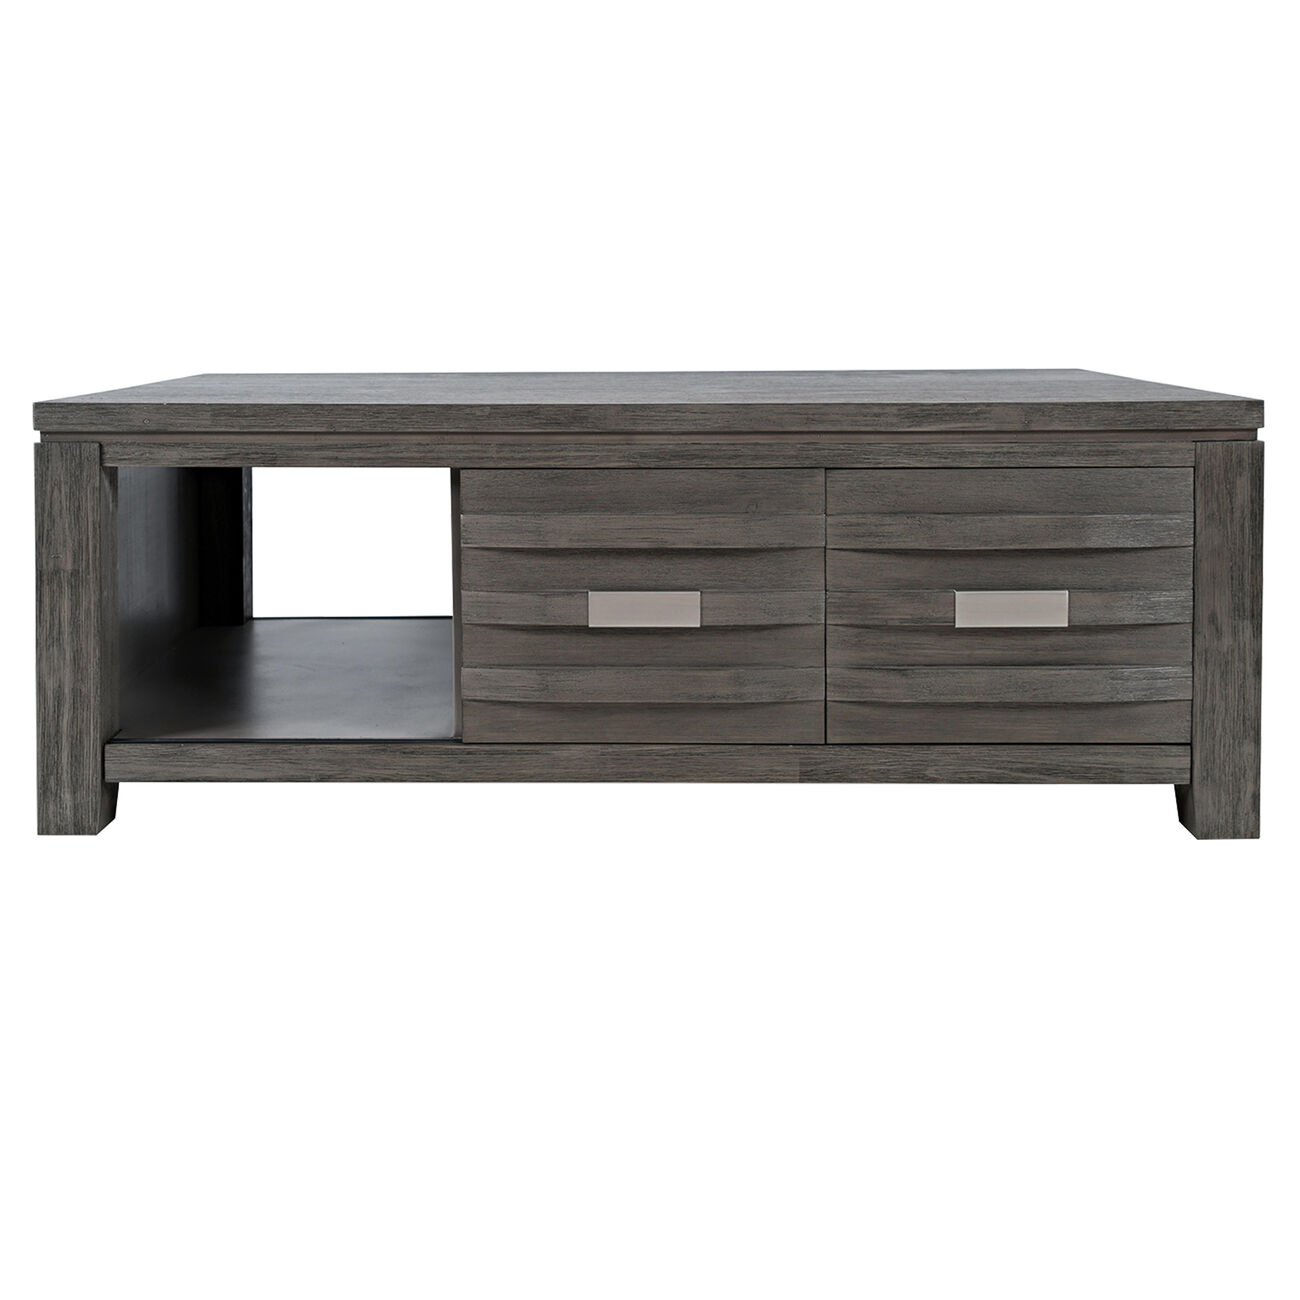 Wooden Cocktail Table with 3 Open Compartments and 2 Sliding Doors, Gray